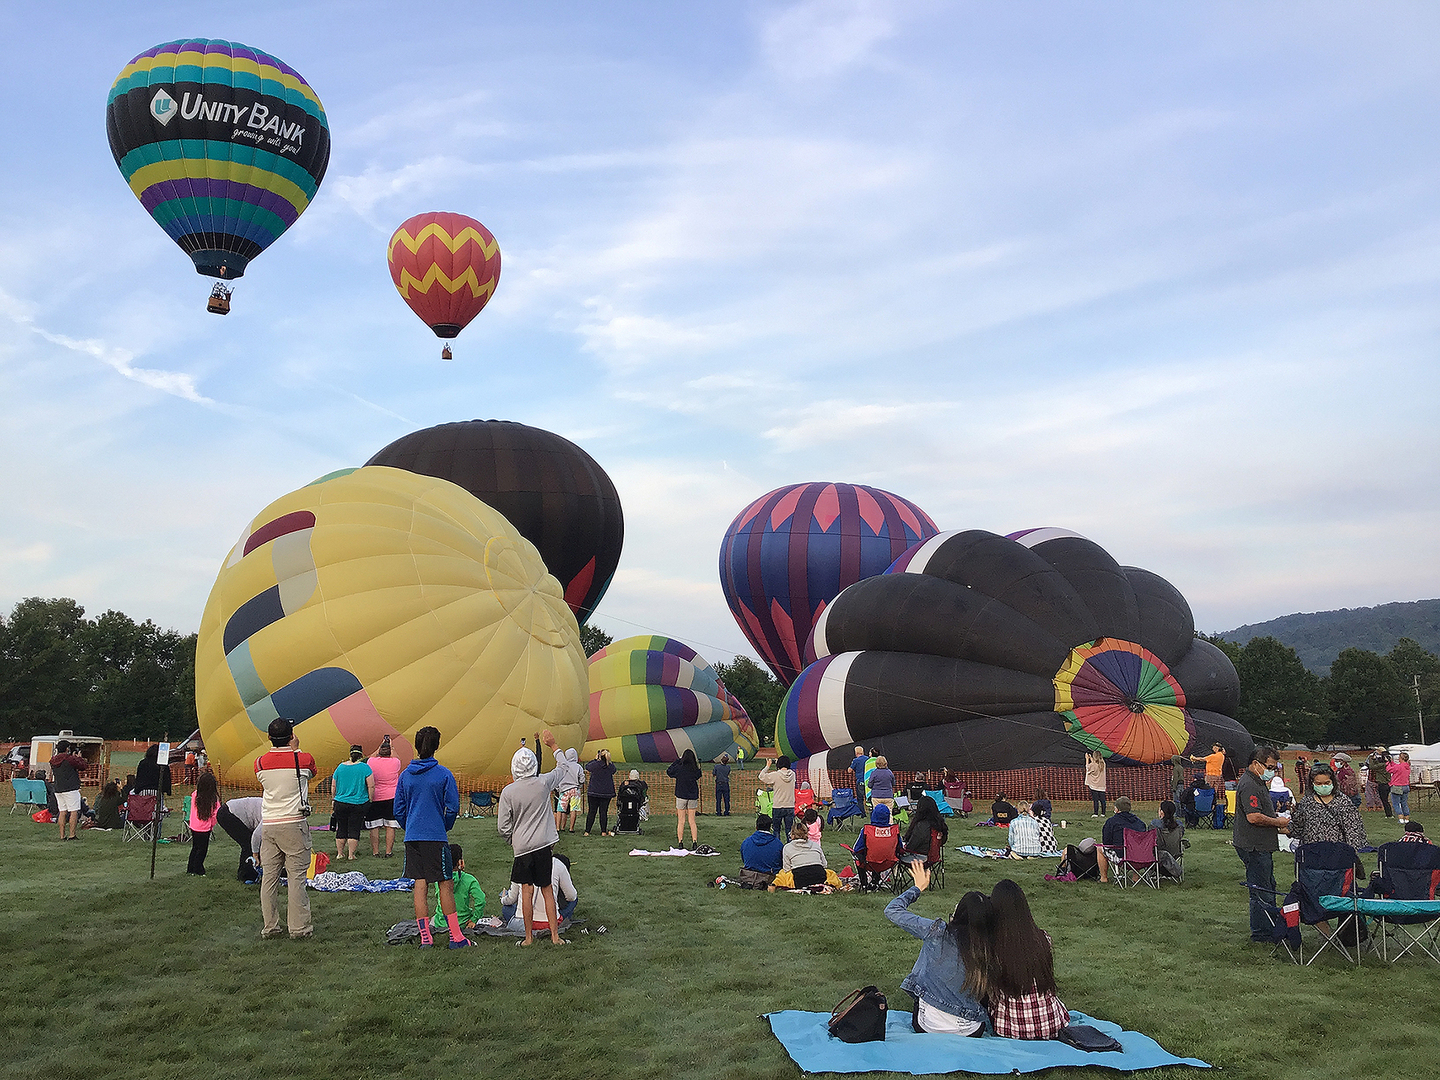 Warren County Hot Air Balloons, Arts and Crafts Festival, Washington, New Jersey, United States